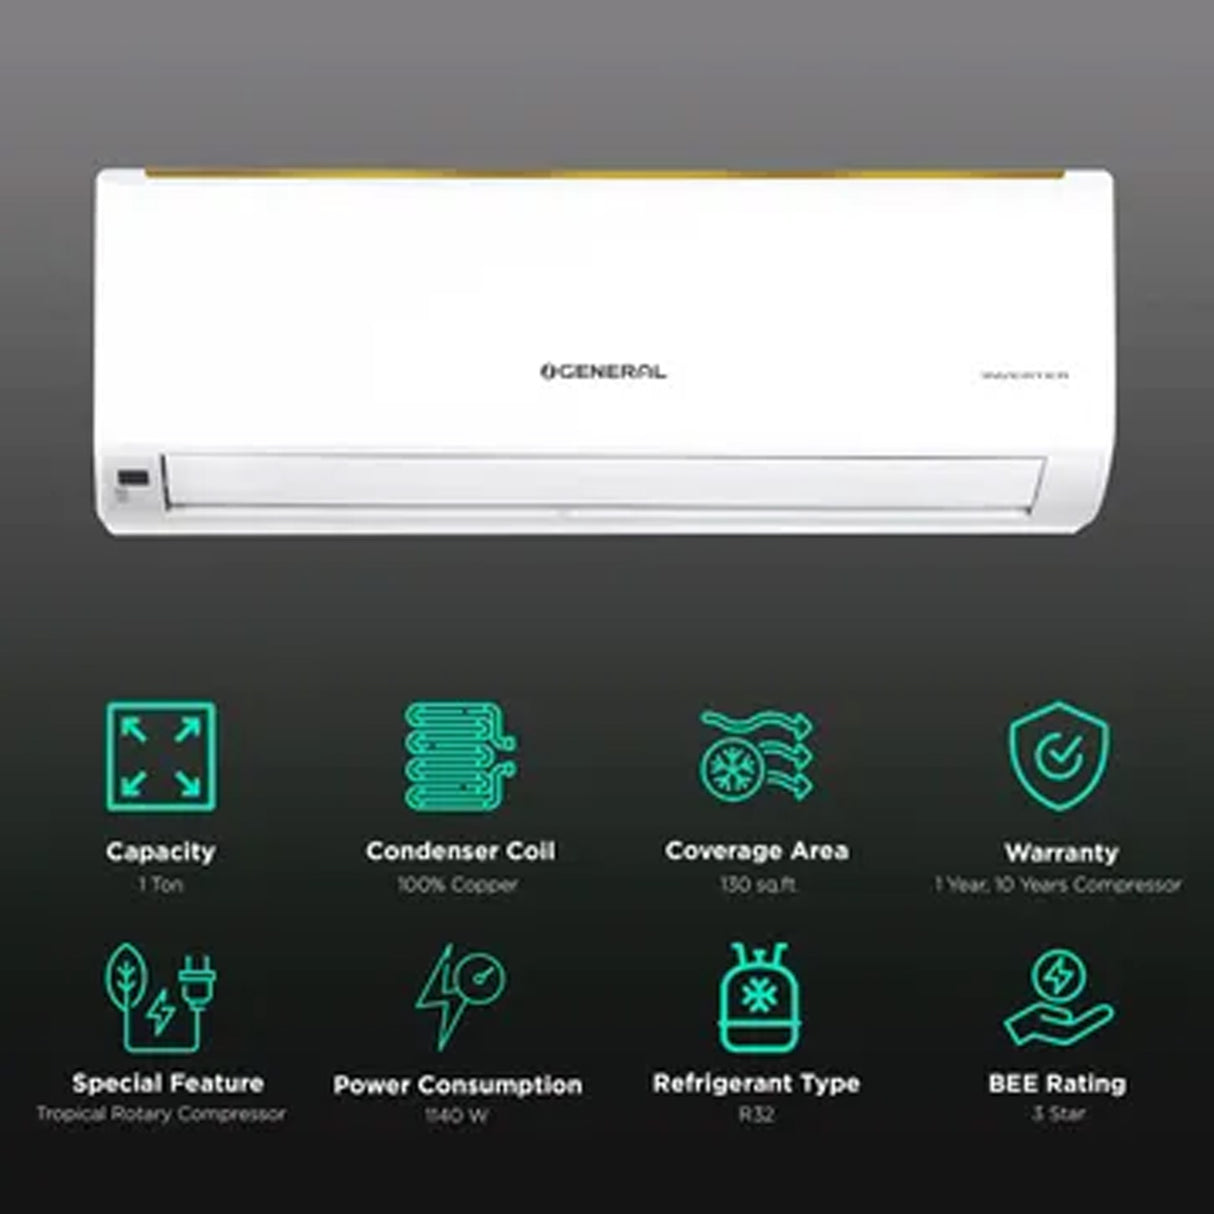 Experience cooling excellence with O GENERAL's top-tier 1 Ton 3 Star Inverter Split AC.